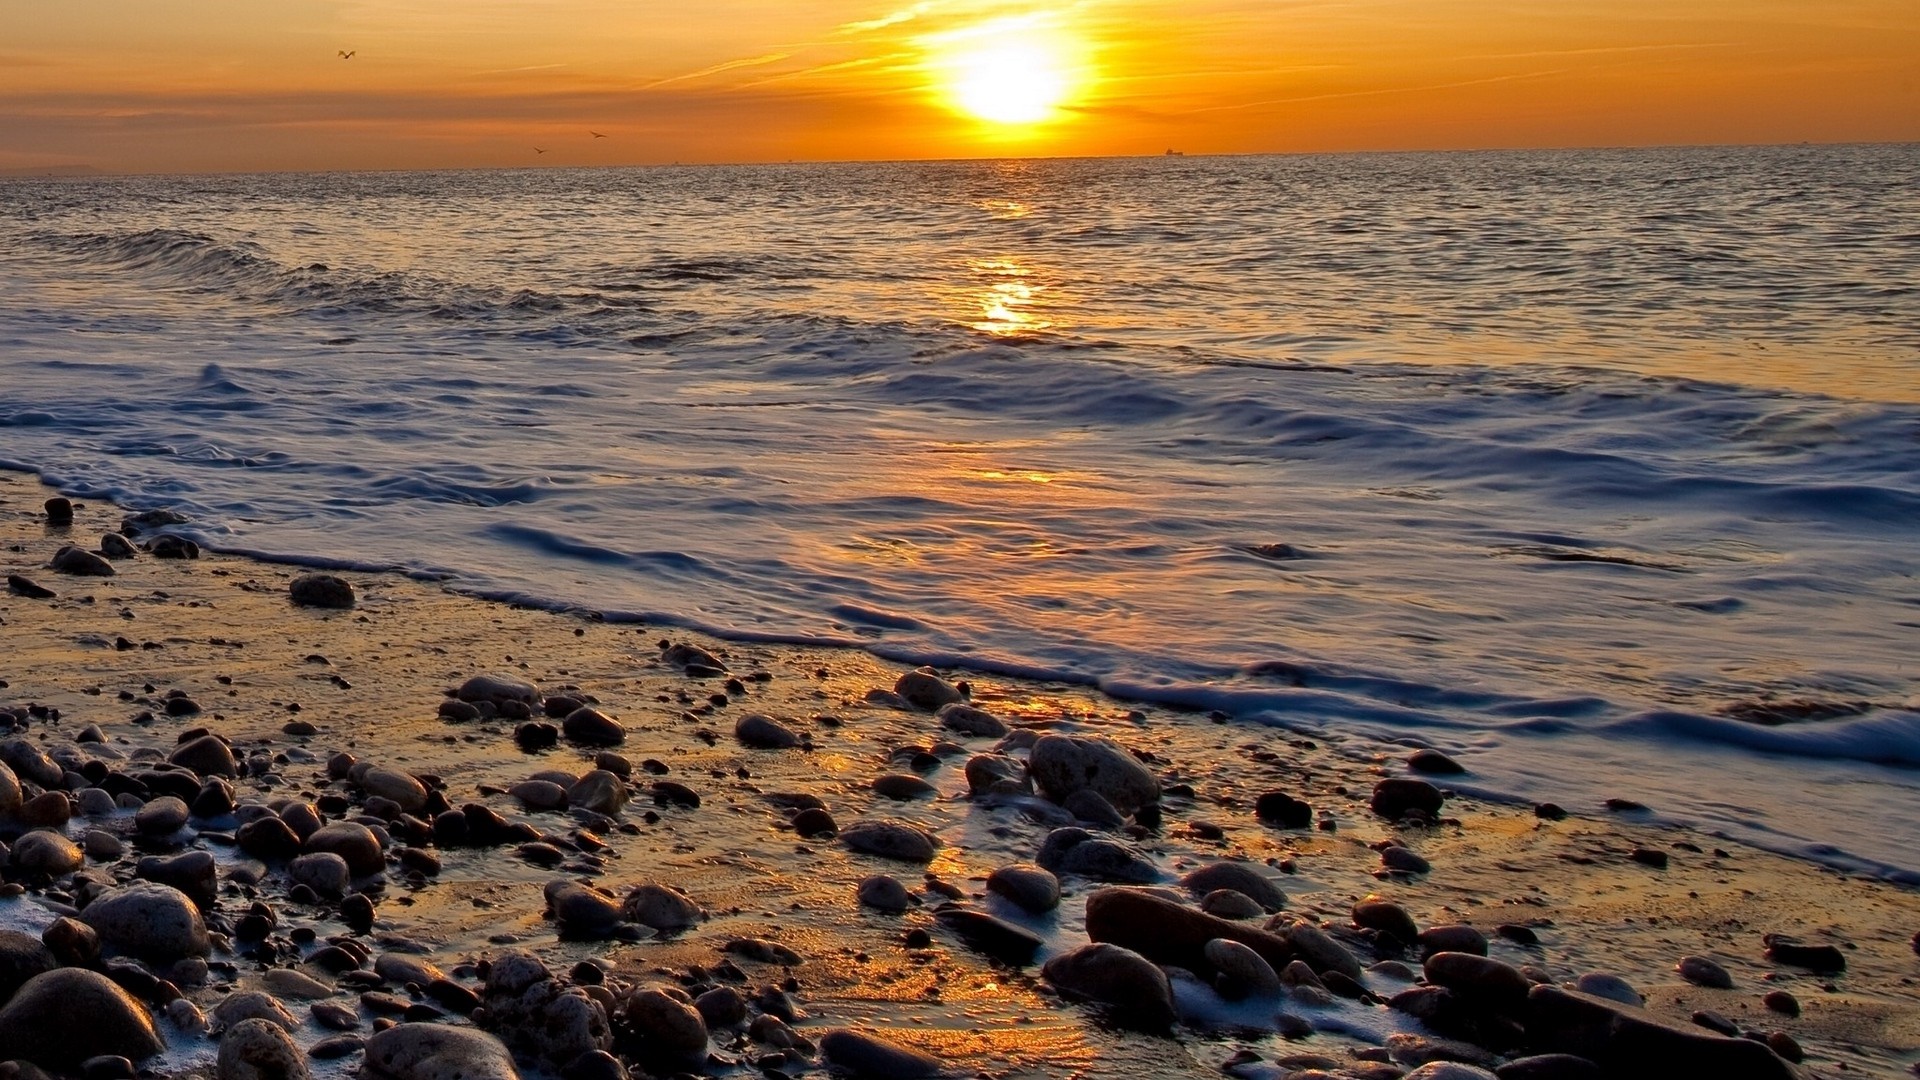 1920x1080 wallpapers: sunset, stones, waves (image)